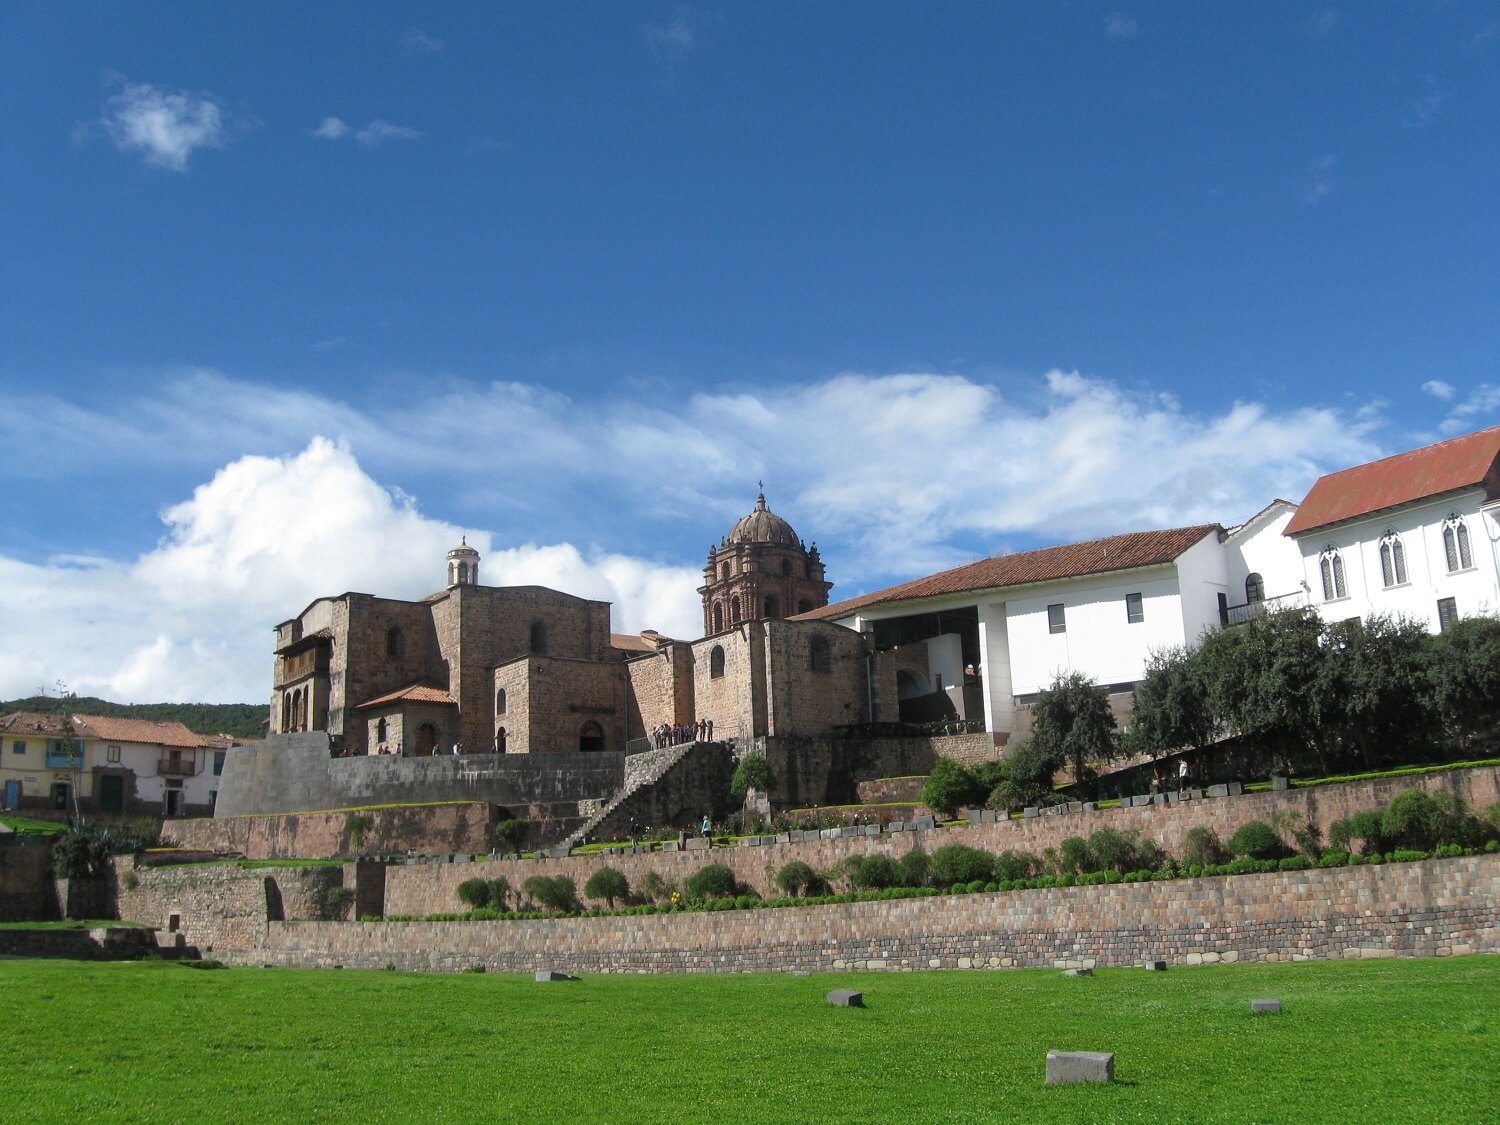 11Qorikancha, Quricancha or Coricancha are the Quechua names for the ancient Sun Temple in Cusco. On its foundations you now find the Convento Santo Domingo, built by the Spaniards. Visit Cusco alternatively with RESPONSible Travel Peru!